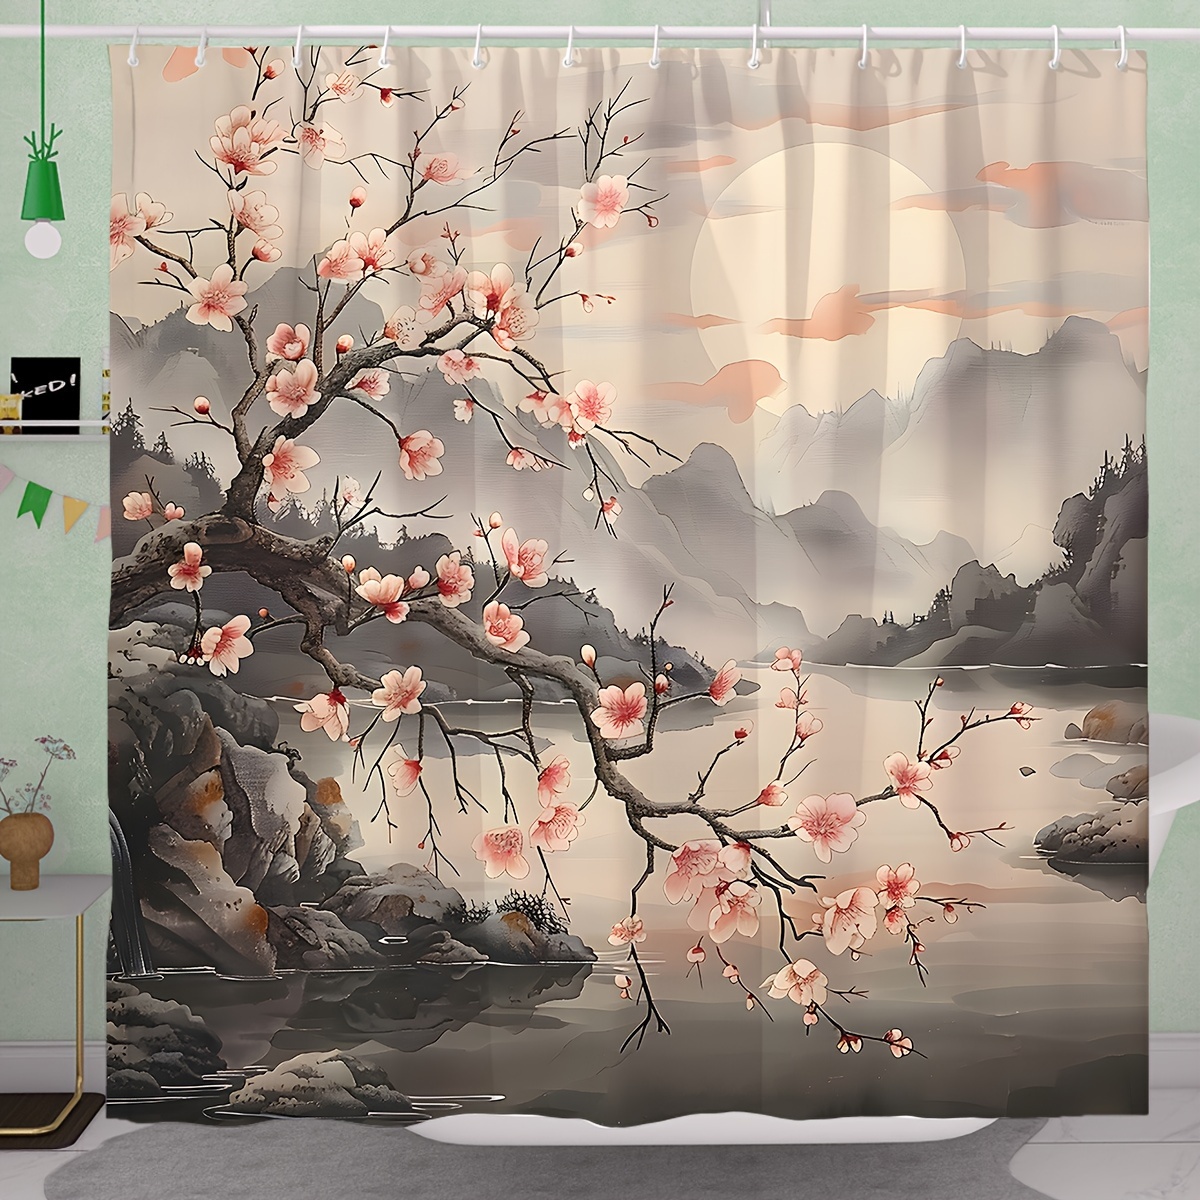 

Cherry & Mountain Range Shower Curtain - Waterproof Polyester, Machine Washable With 12 Hooks Included, Pink Taupe Floral Design For Bathroom Decor, 71x71 Inches